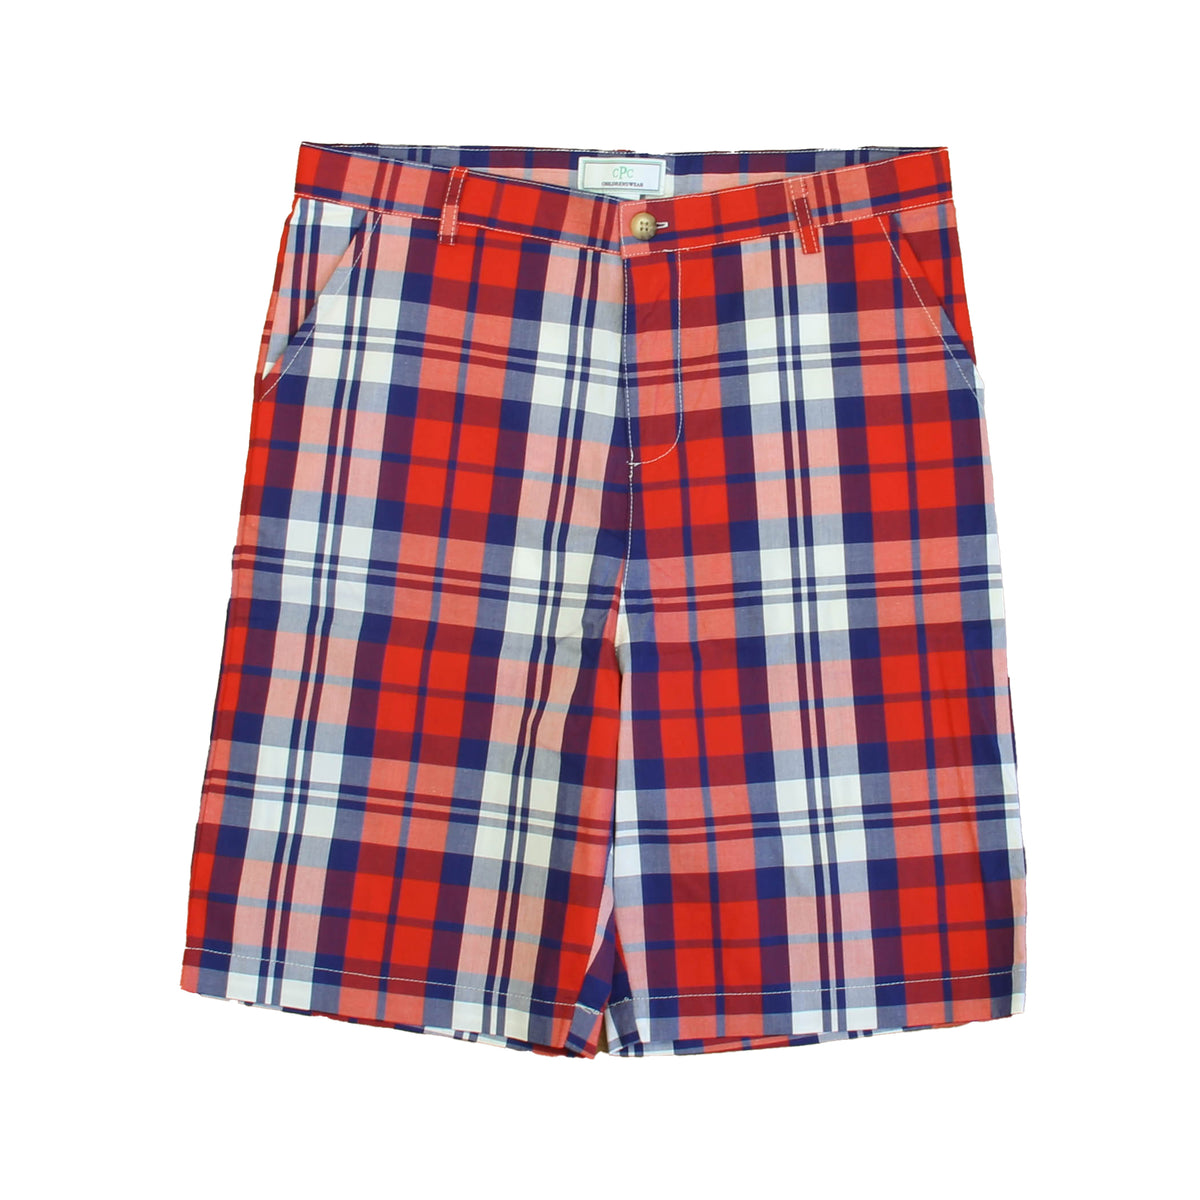 New with Tags: Summer Plaid Shorts size: 6-14 Years -- FINAL SALE